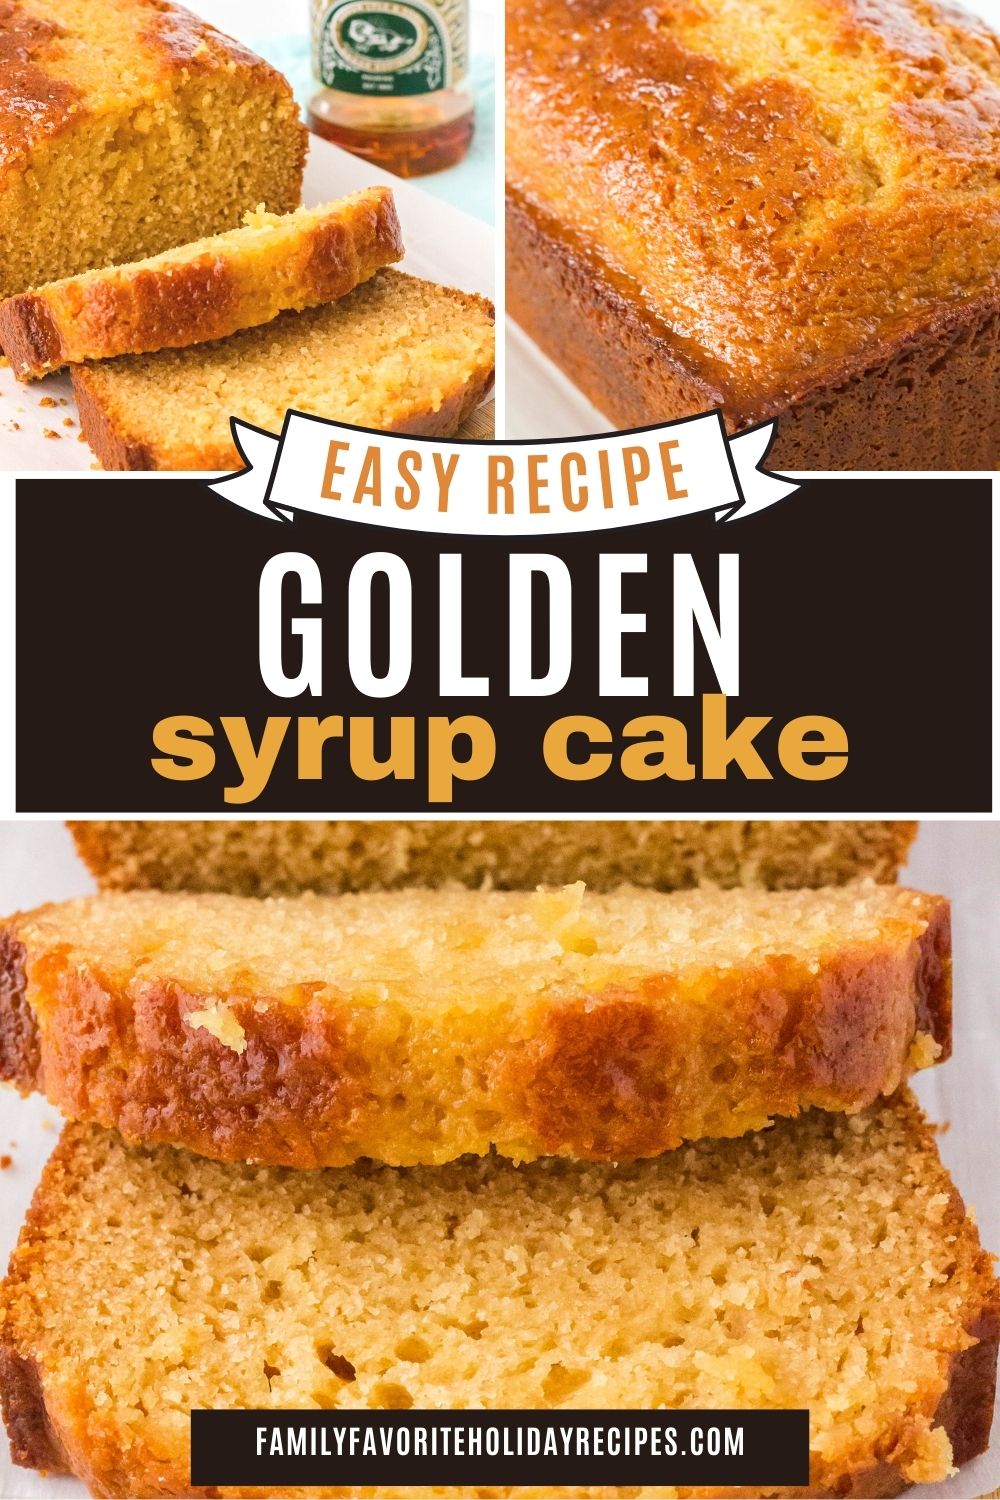 Golden syrup recipes for all the family - Ragus